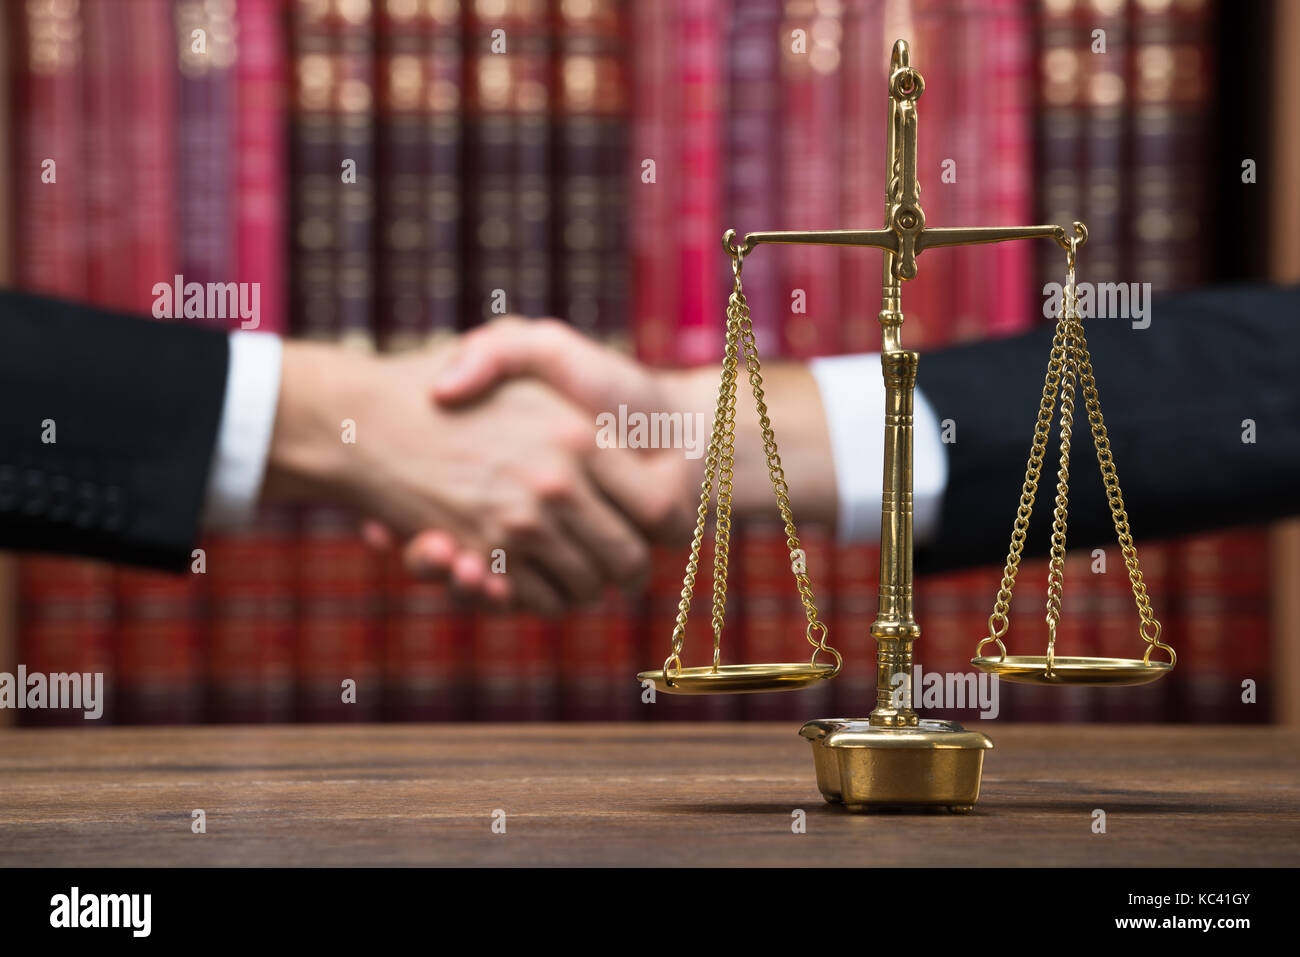 Justice scale on wooden table with judge and client shaking hands in background at courtroom Stock Photo